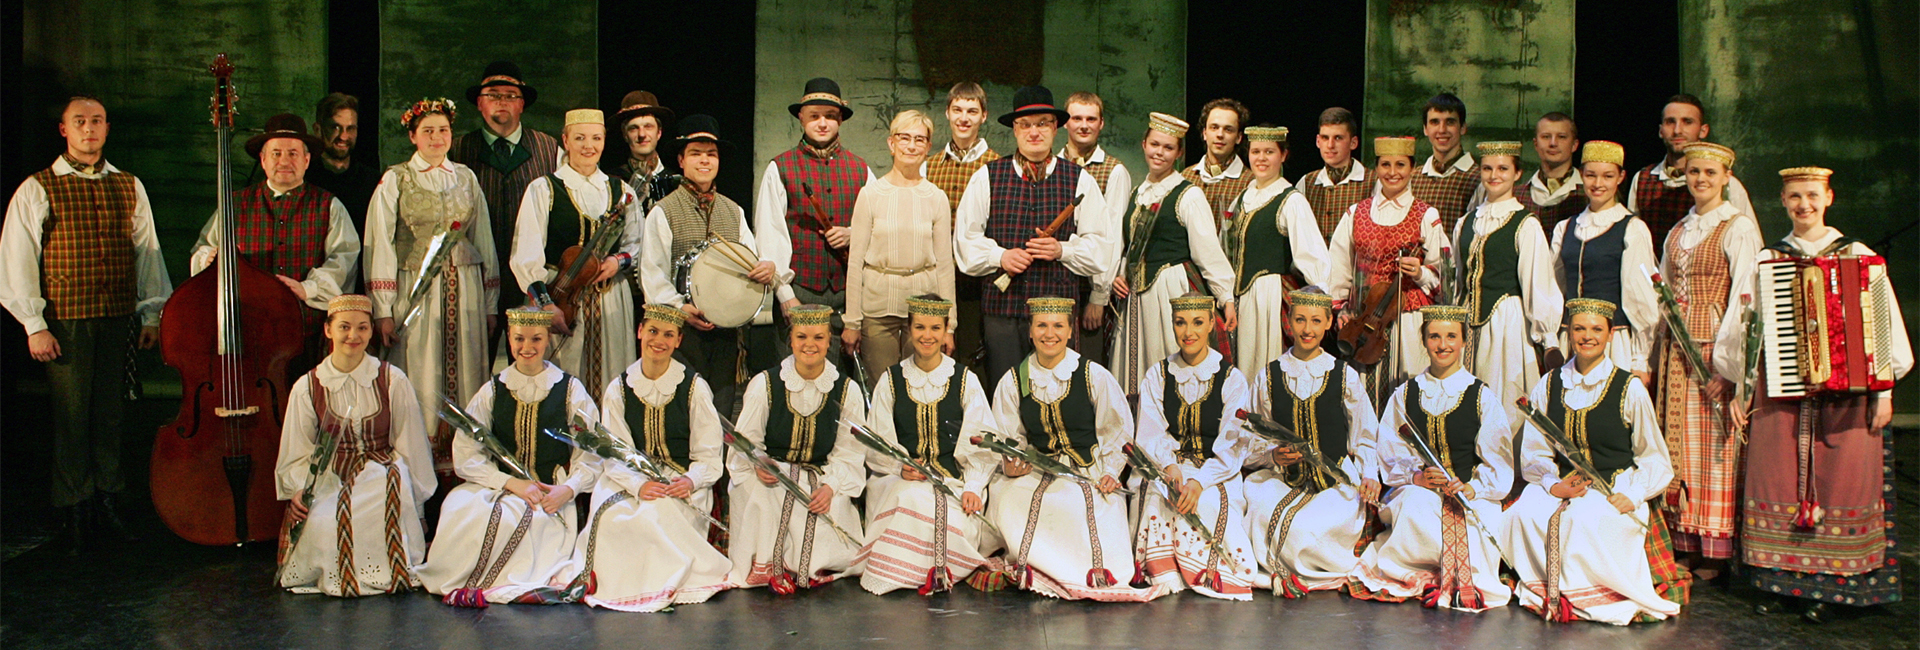 Formed in 1972, Siauliai University's folk ensemble has performed around the world.